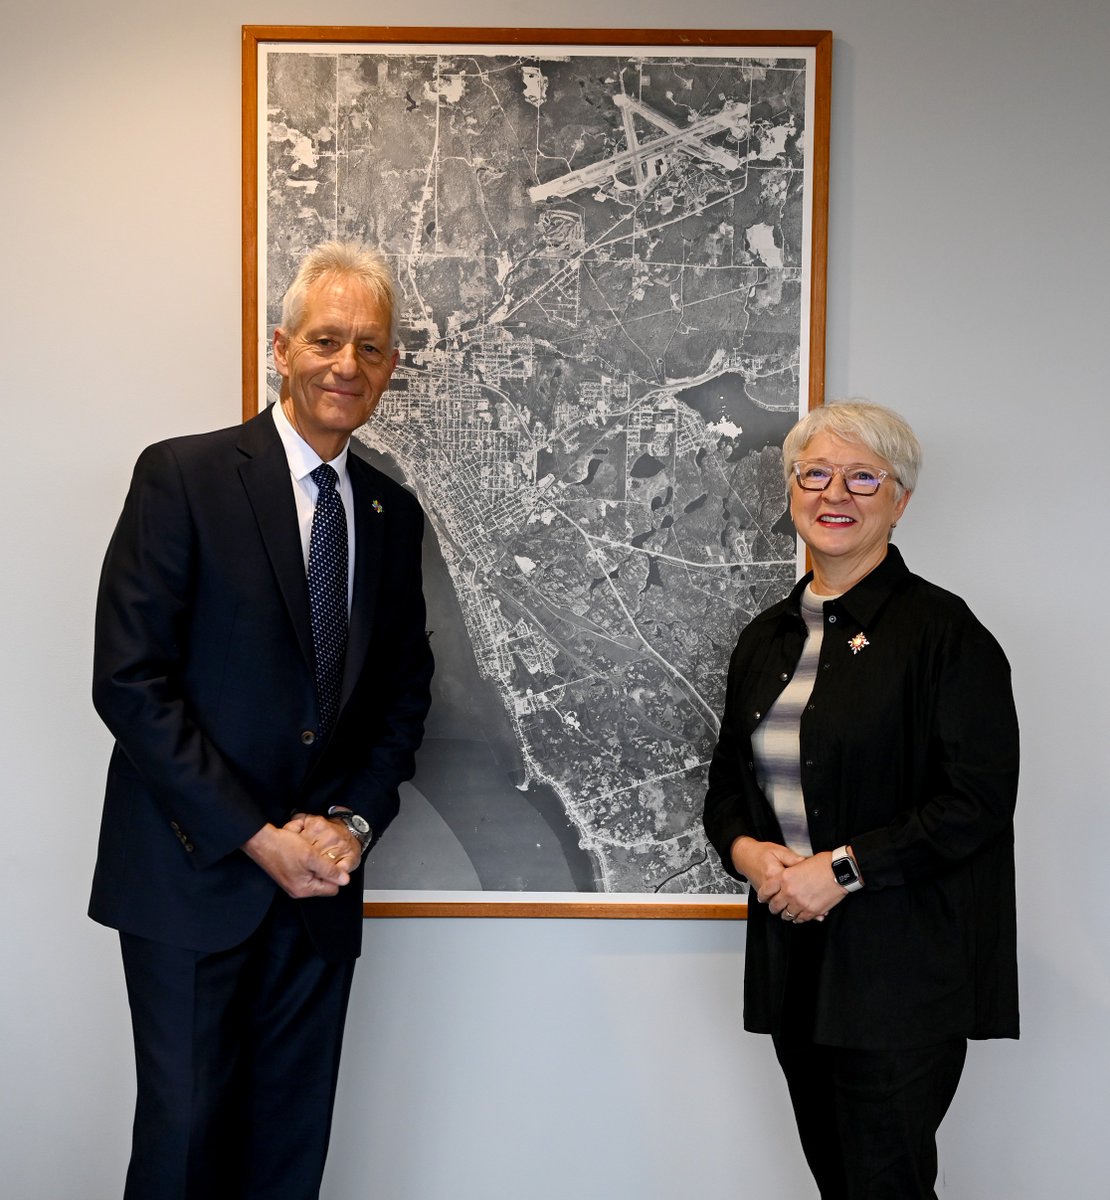 We’re honoured to welcome the Honourable Edith Dumont, Lieutenant Governor of Ontario, to North Bay today! This morning, she attended City Hall and met with Mayor Chirico.